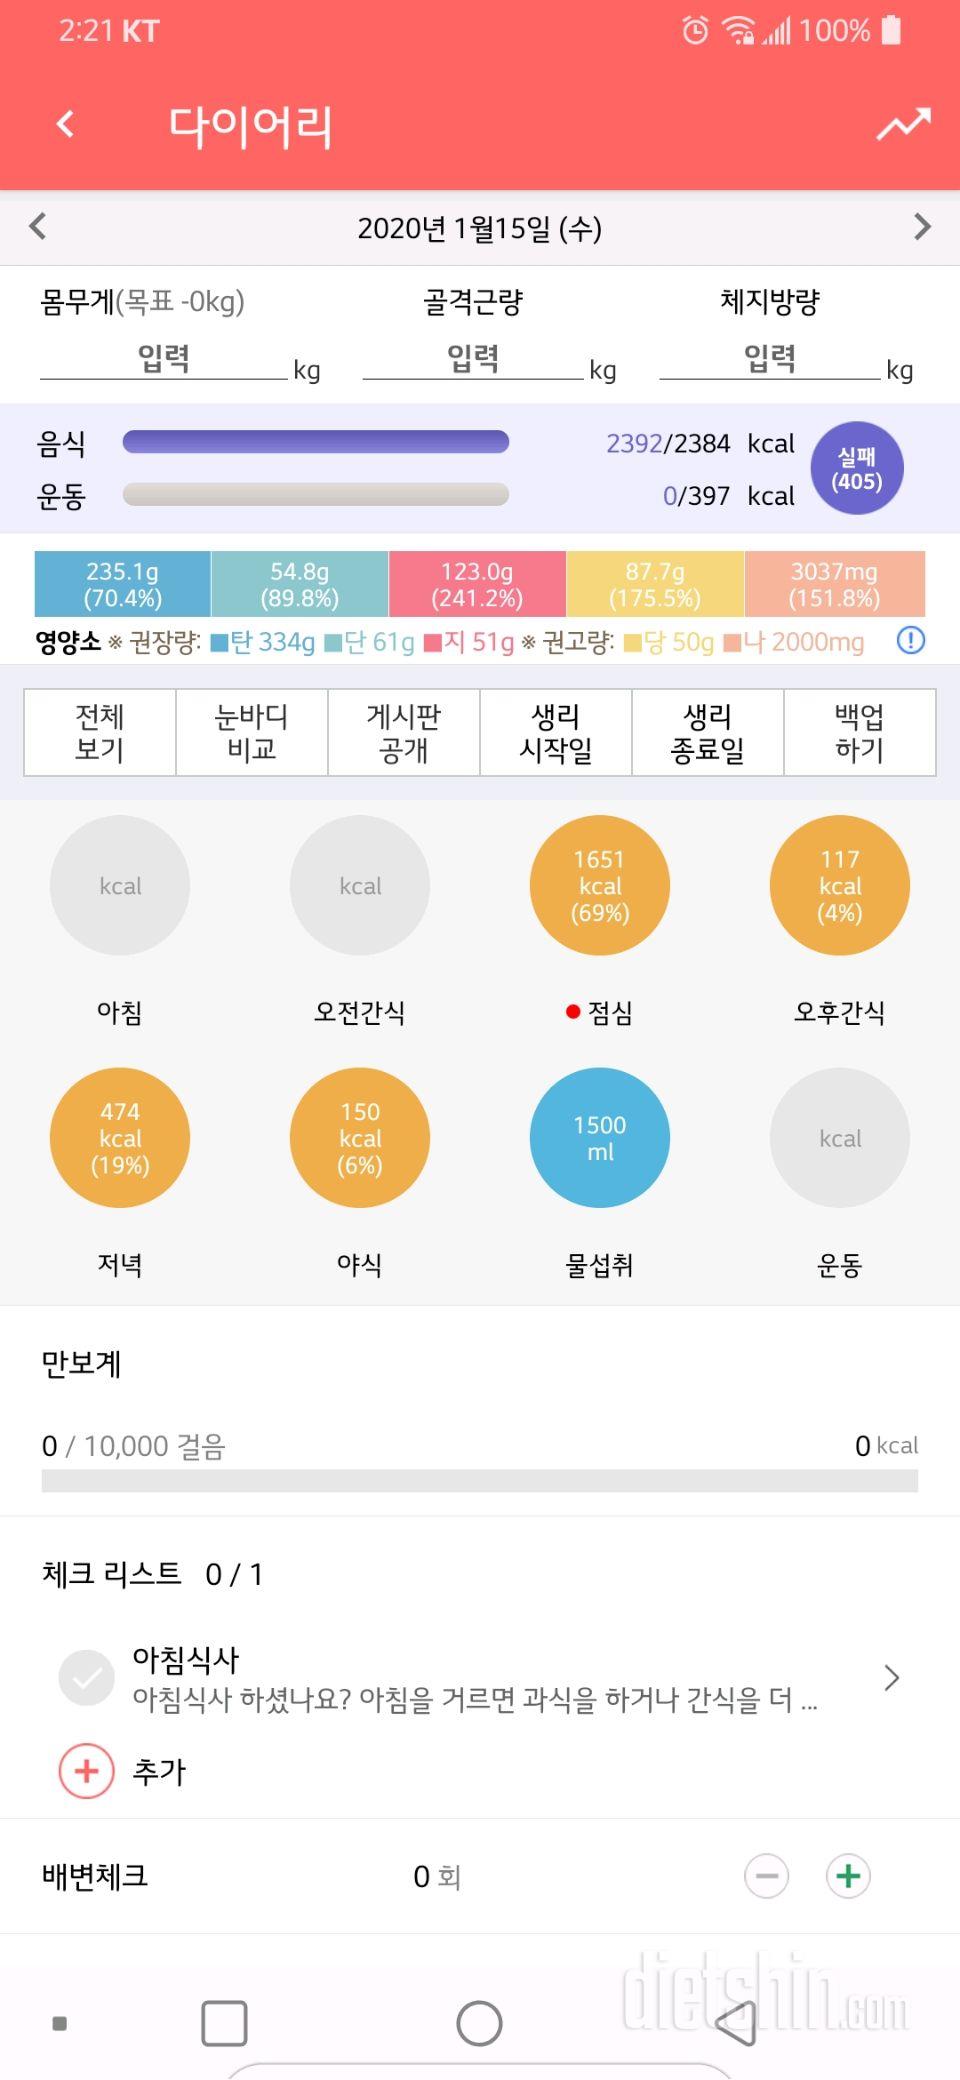 1월15일 수욜